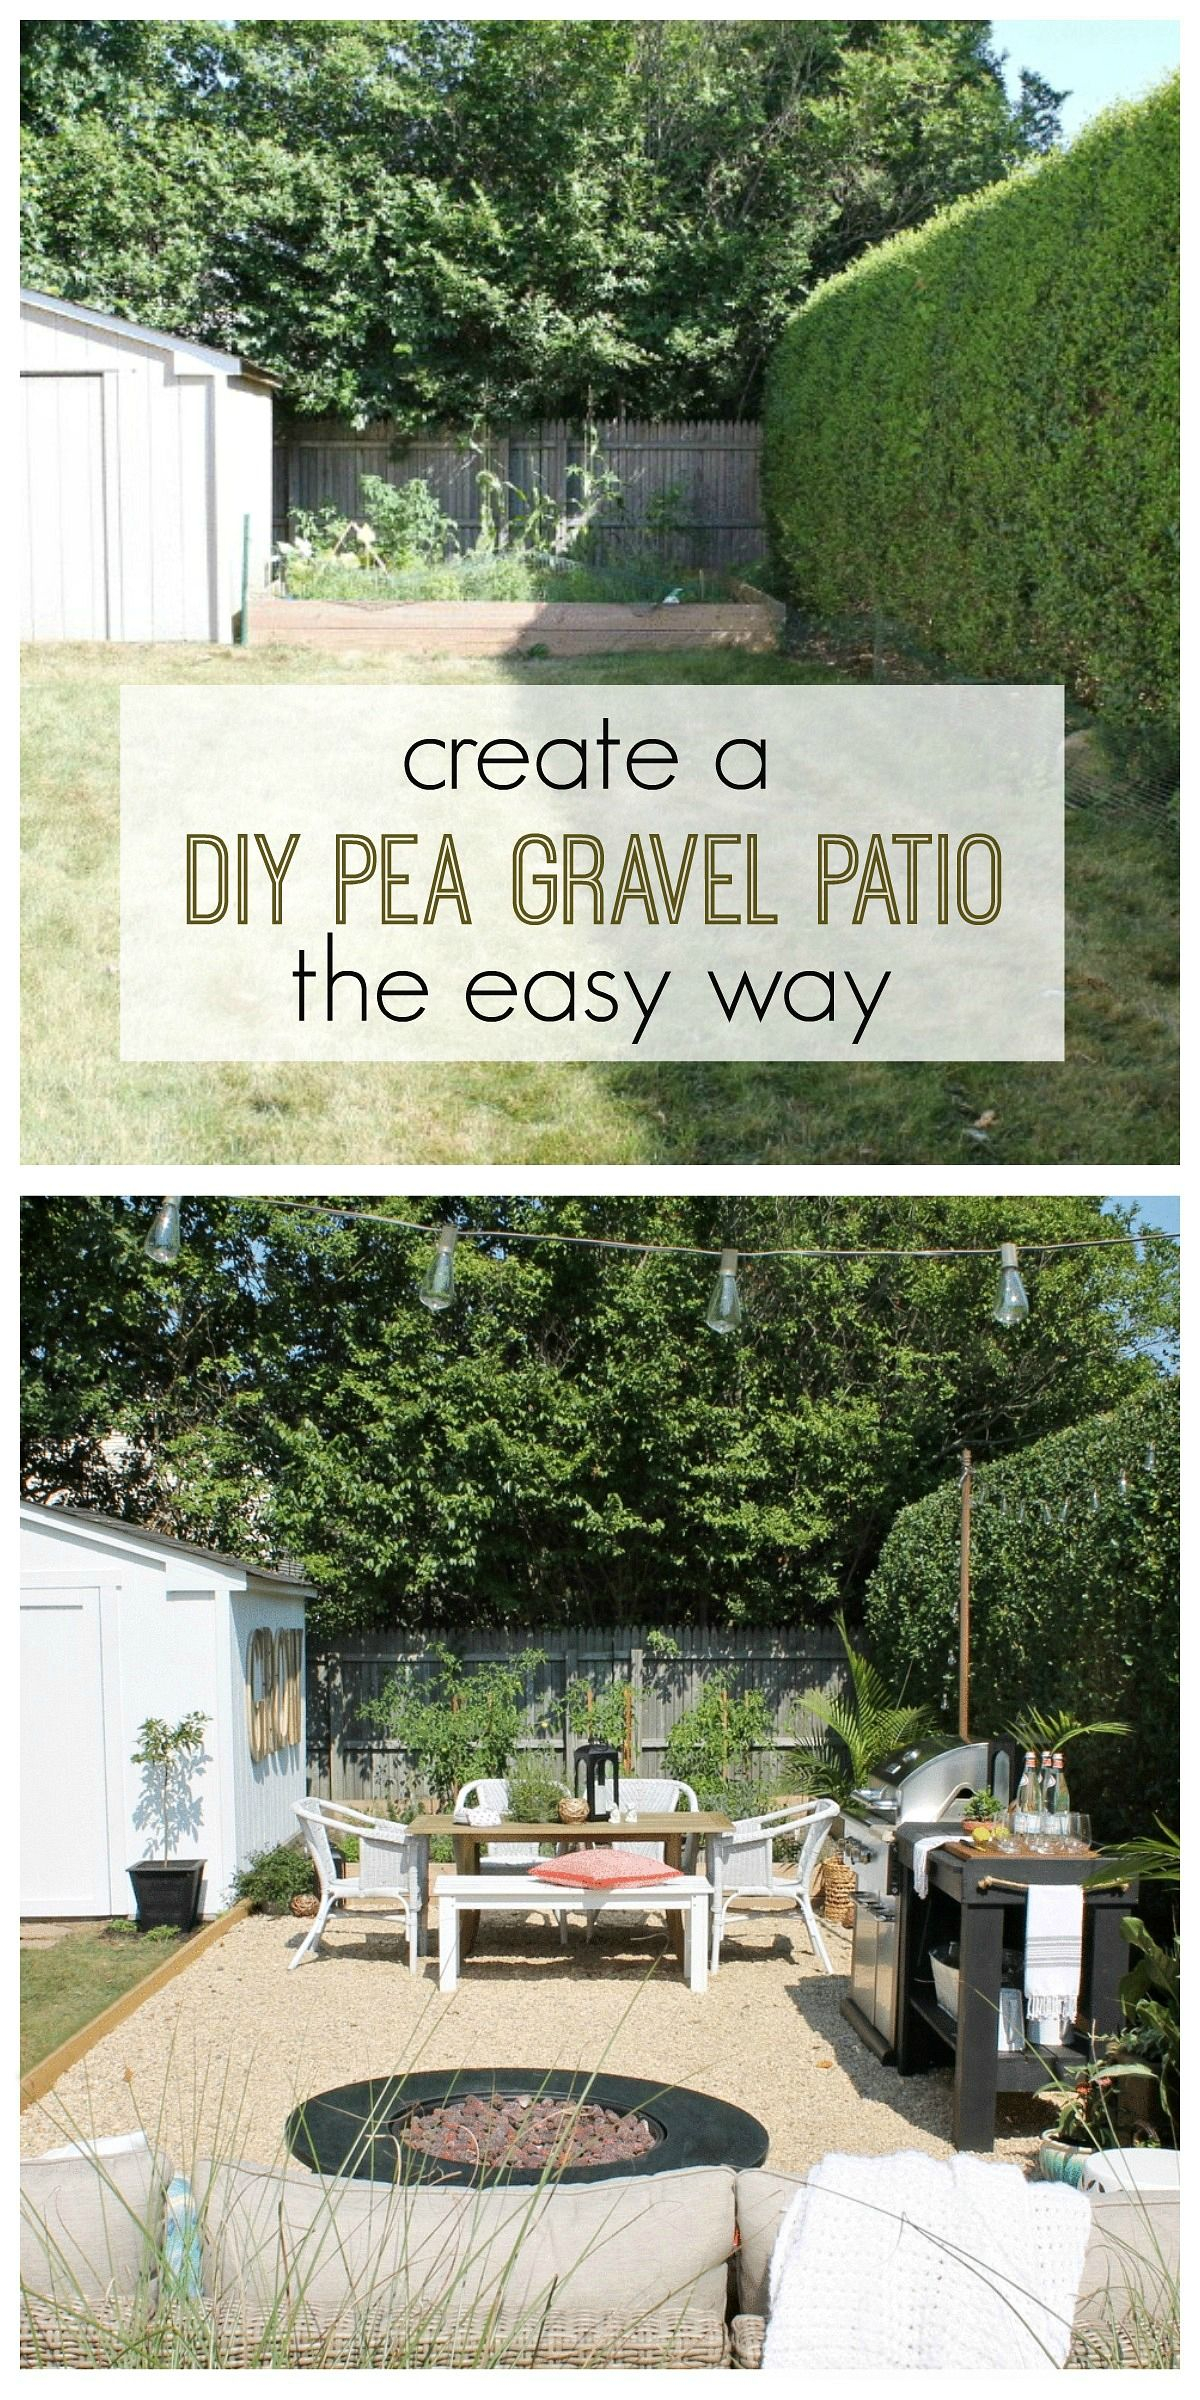 Create A Diy Pea Gravel Patio The Easy Way Outside Your Home pertaining to dimensions 1200 X 2400